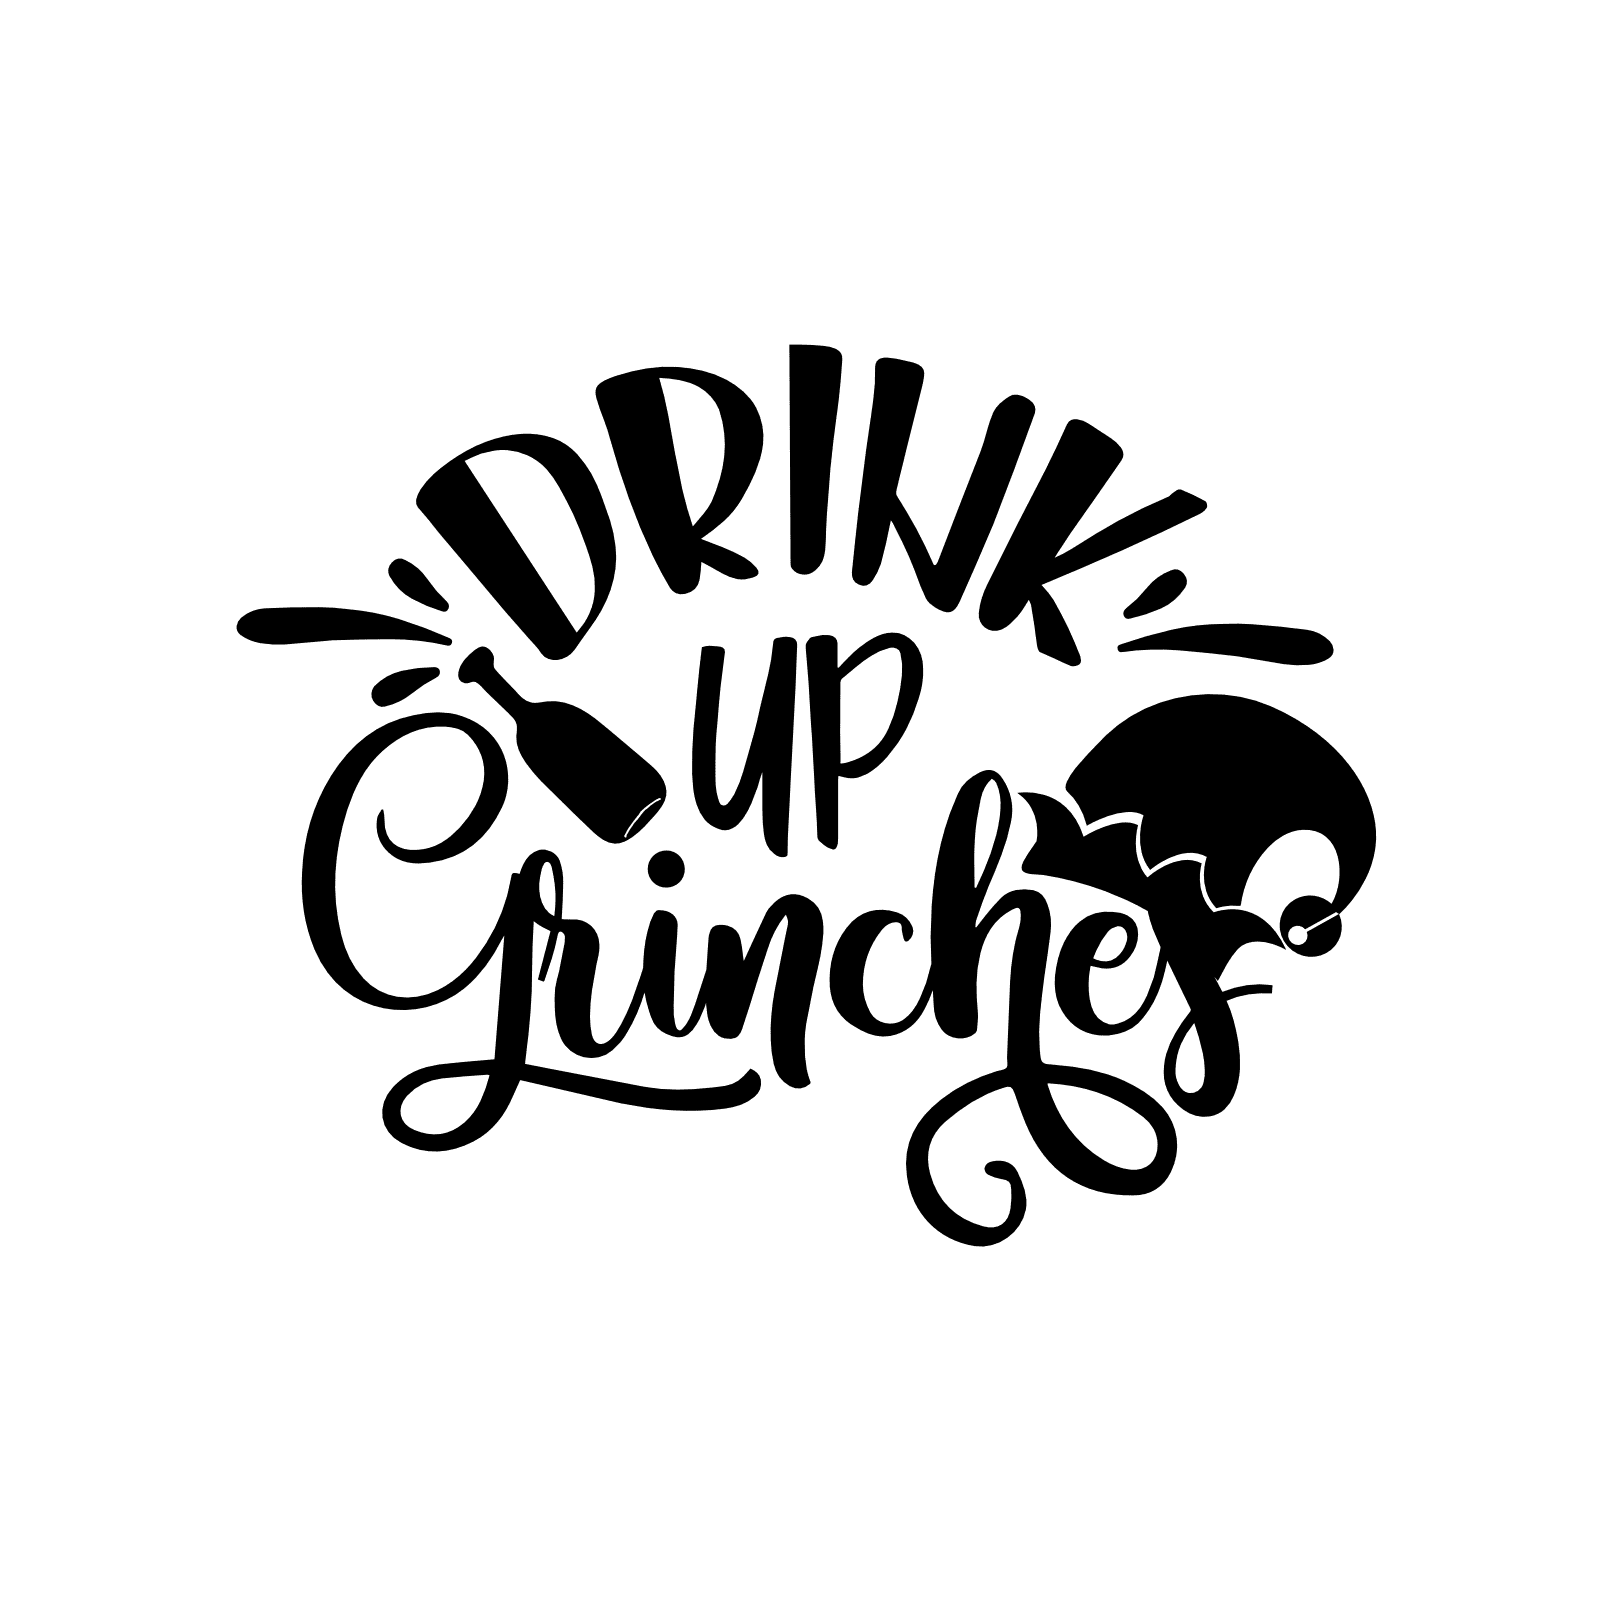 drink-up-grinche-christmas-free-svg-file-SvgHeart.Com